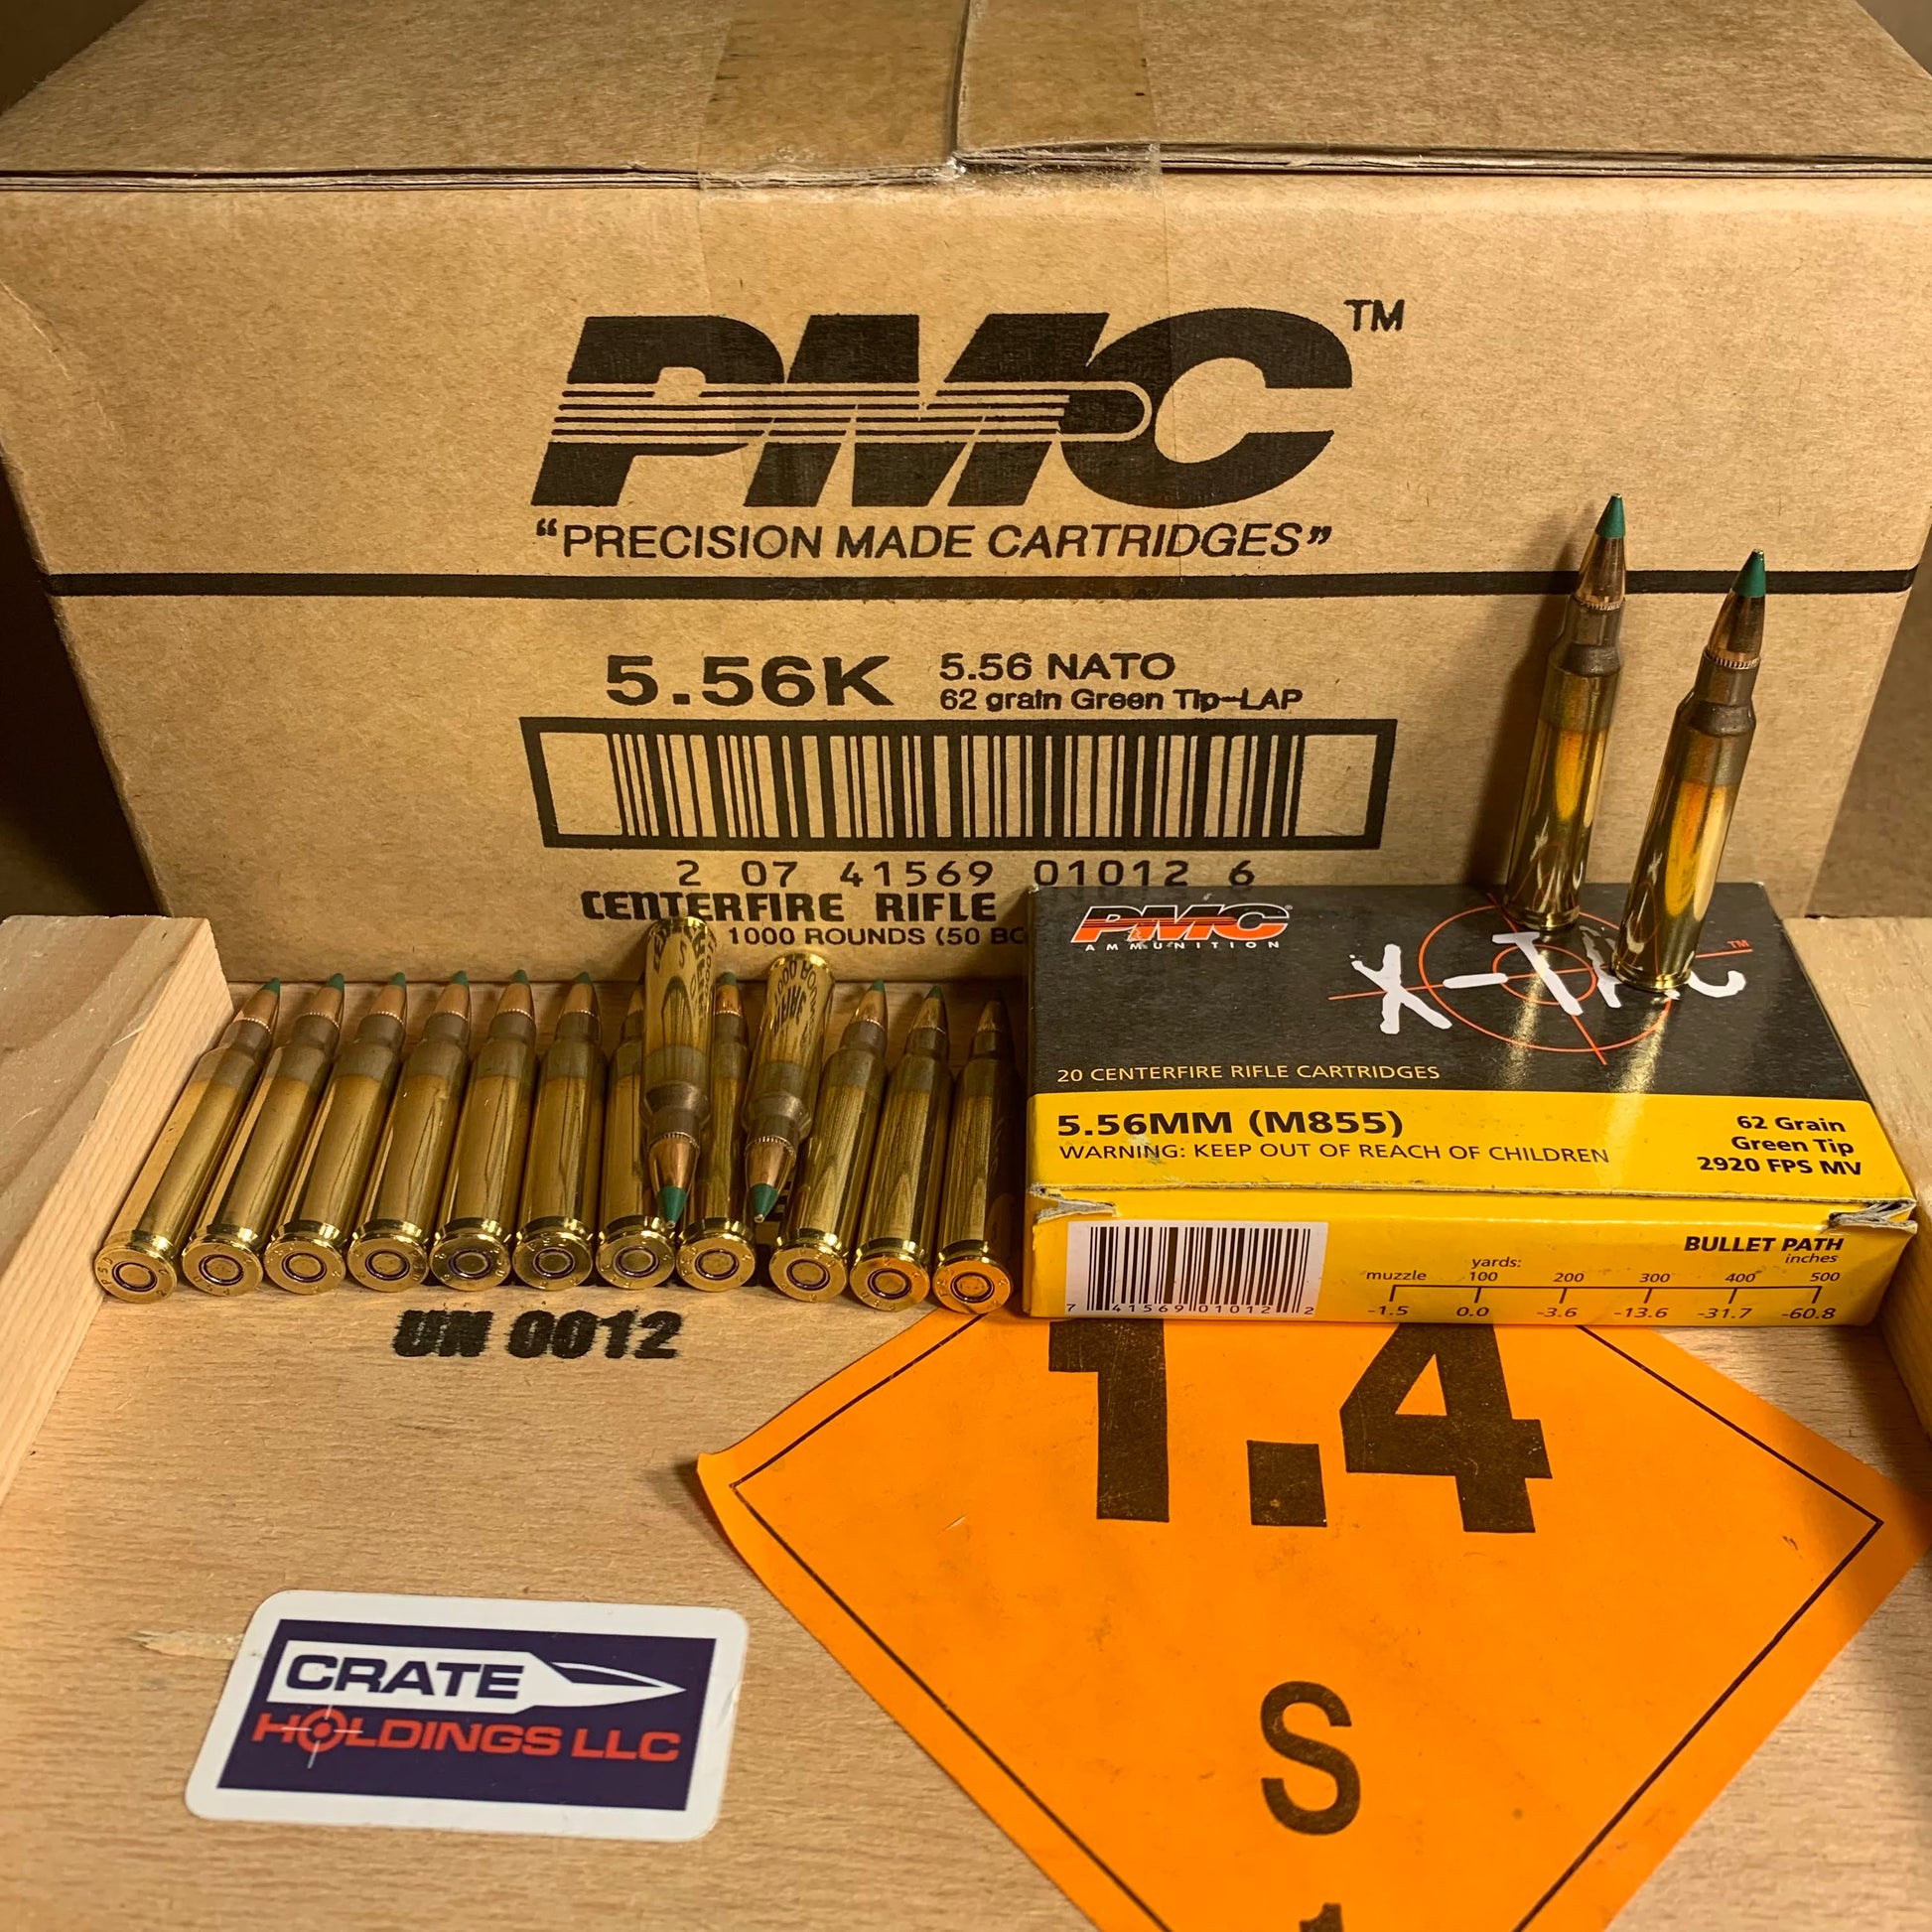 1000 Rounds M855 PMC X-TAC 62gr Green Tip LAP 5.56 NATO Ammo- 5.56K